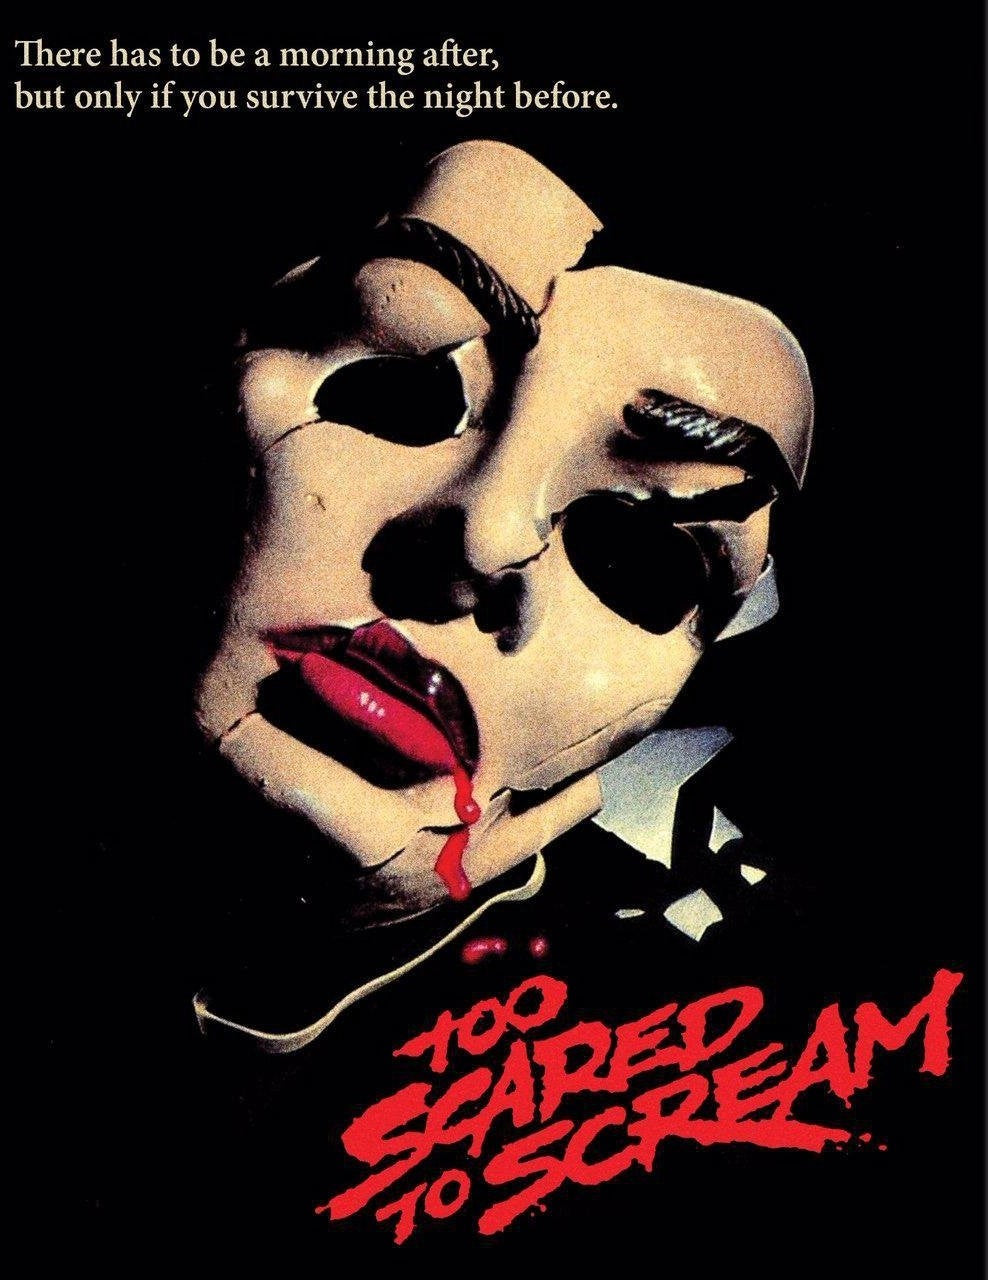 Too Scared To Scream (Limited Edition) Blu-Ray Blu-Ray